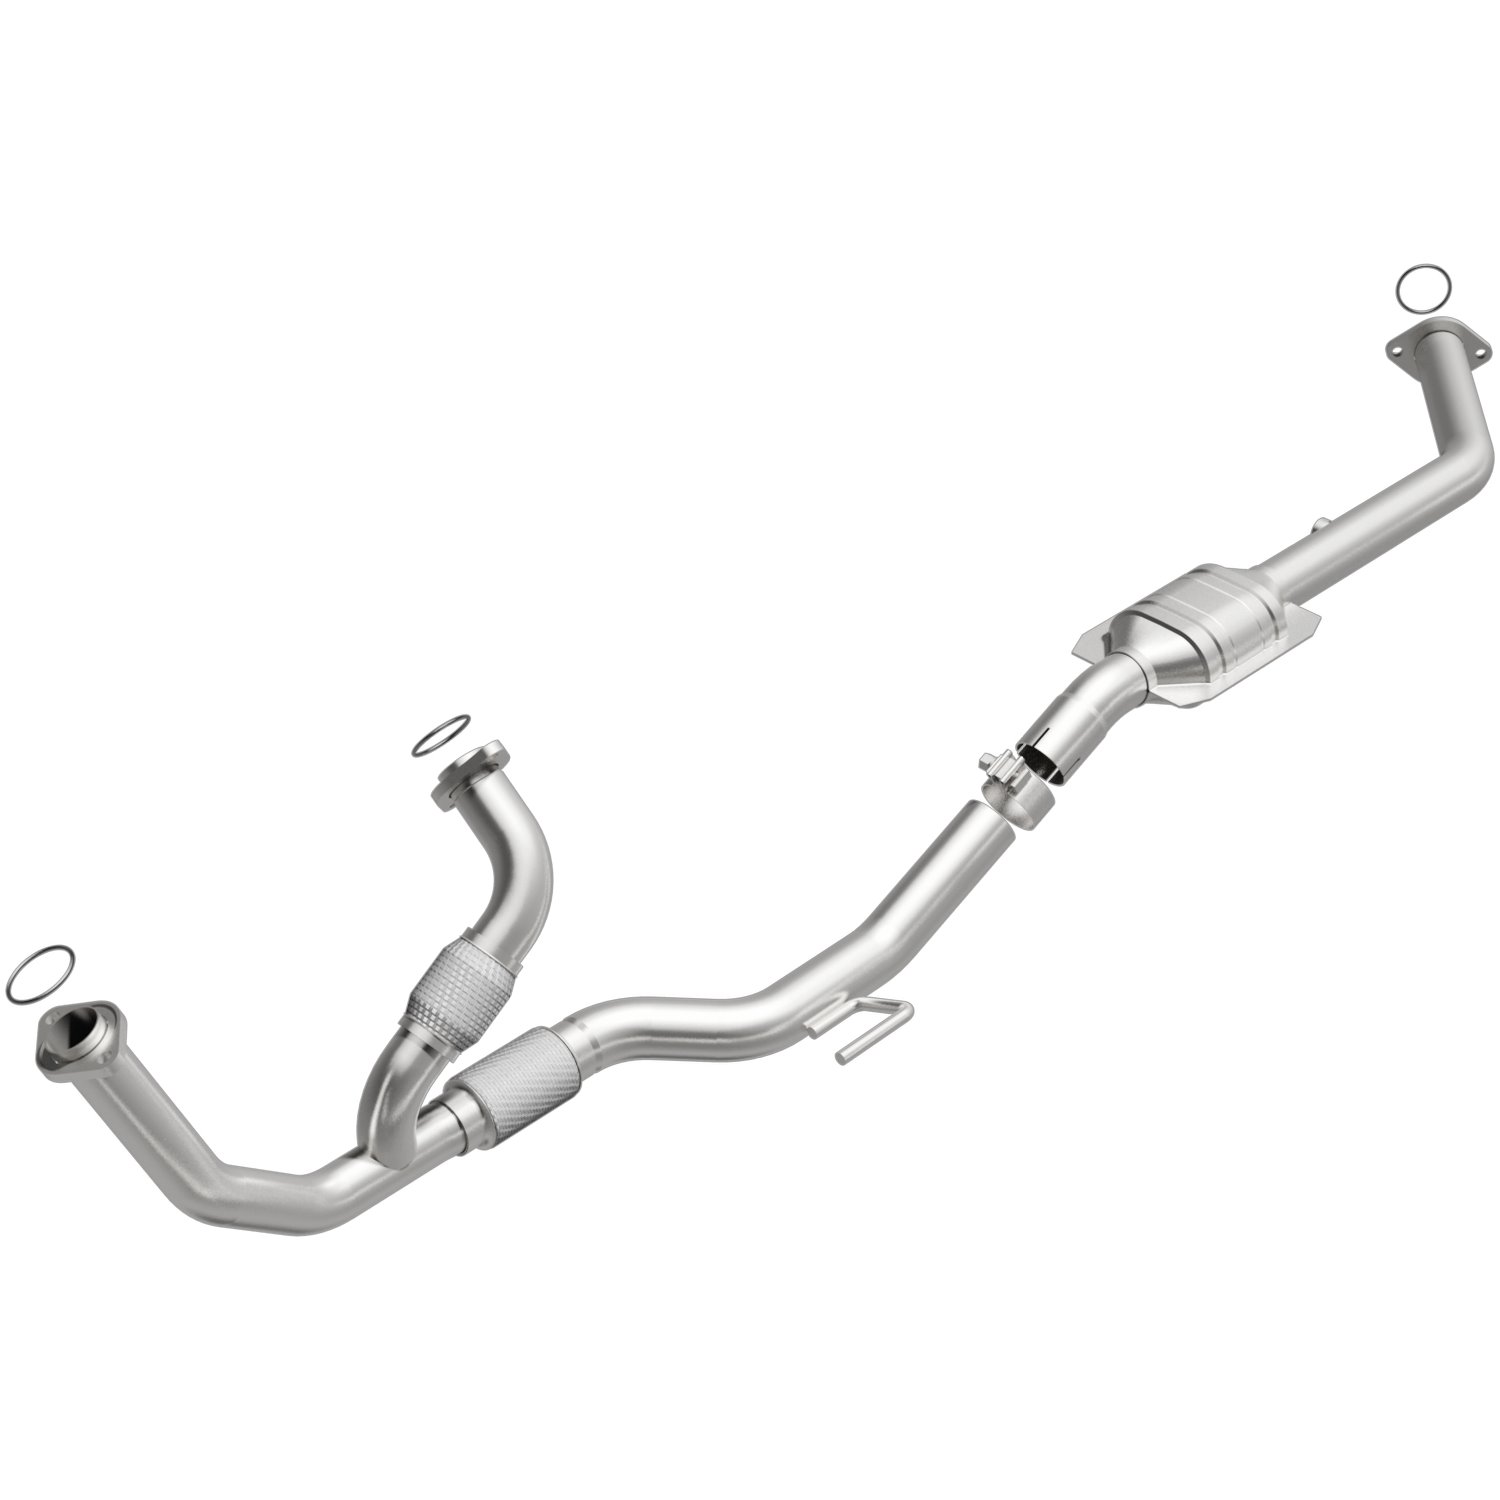 1998-2000 Toyota Sienna HM Grade Federal / EPA Compliant Direct-Fit Catalytic Converter